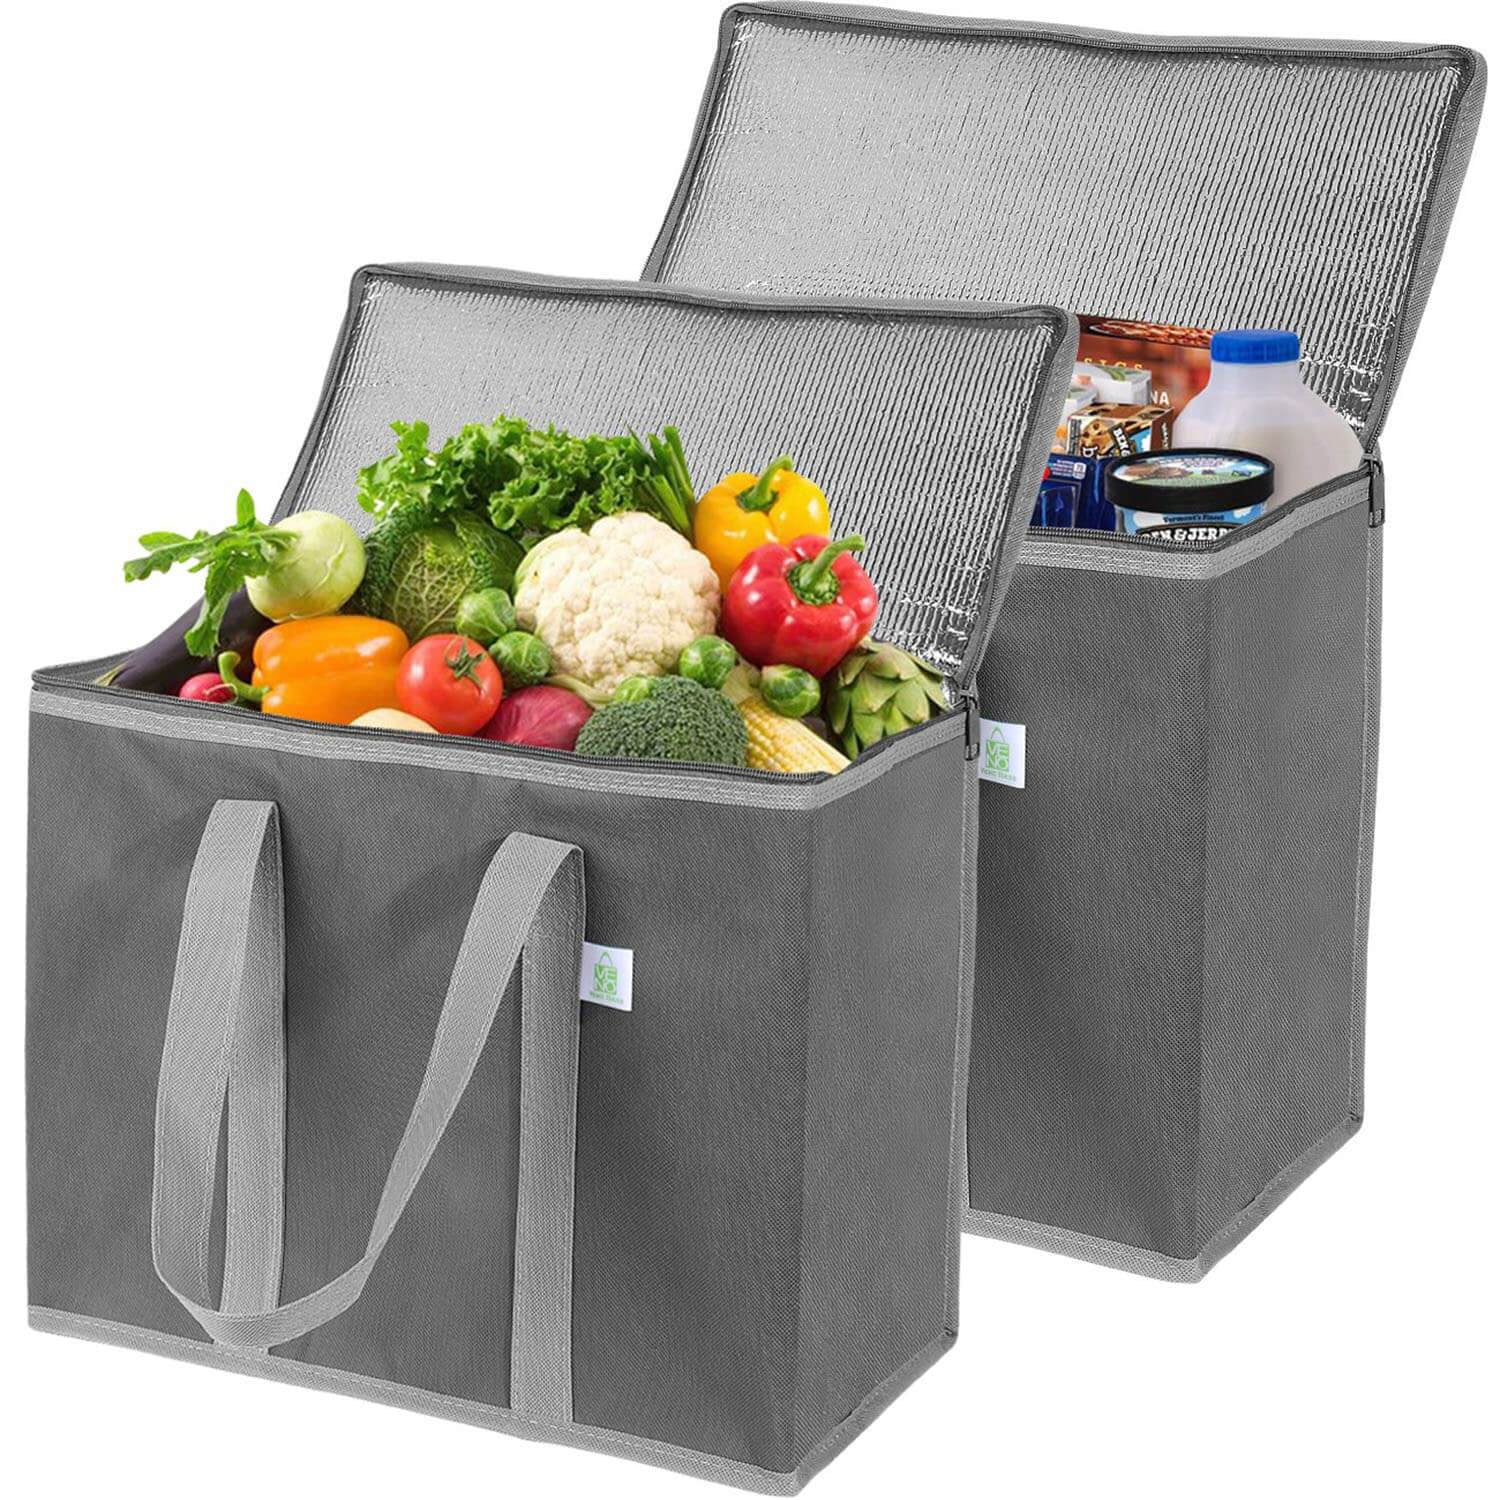 Insulated Reusable Grocery Bag, Durable, Collapsible, Eco-Friendly